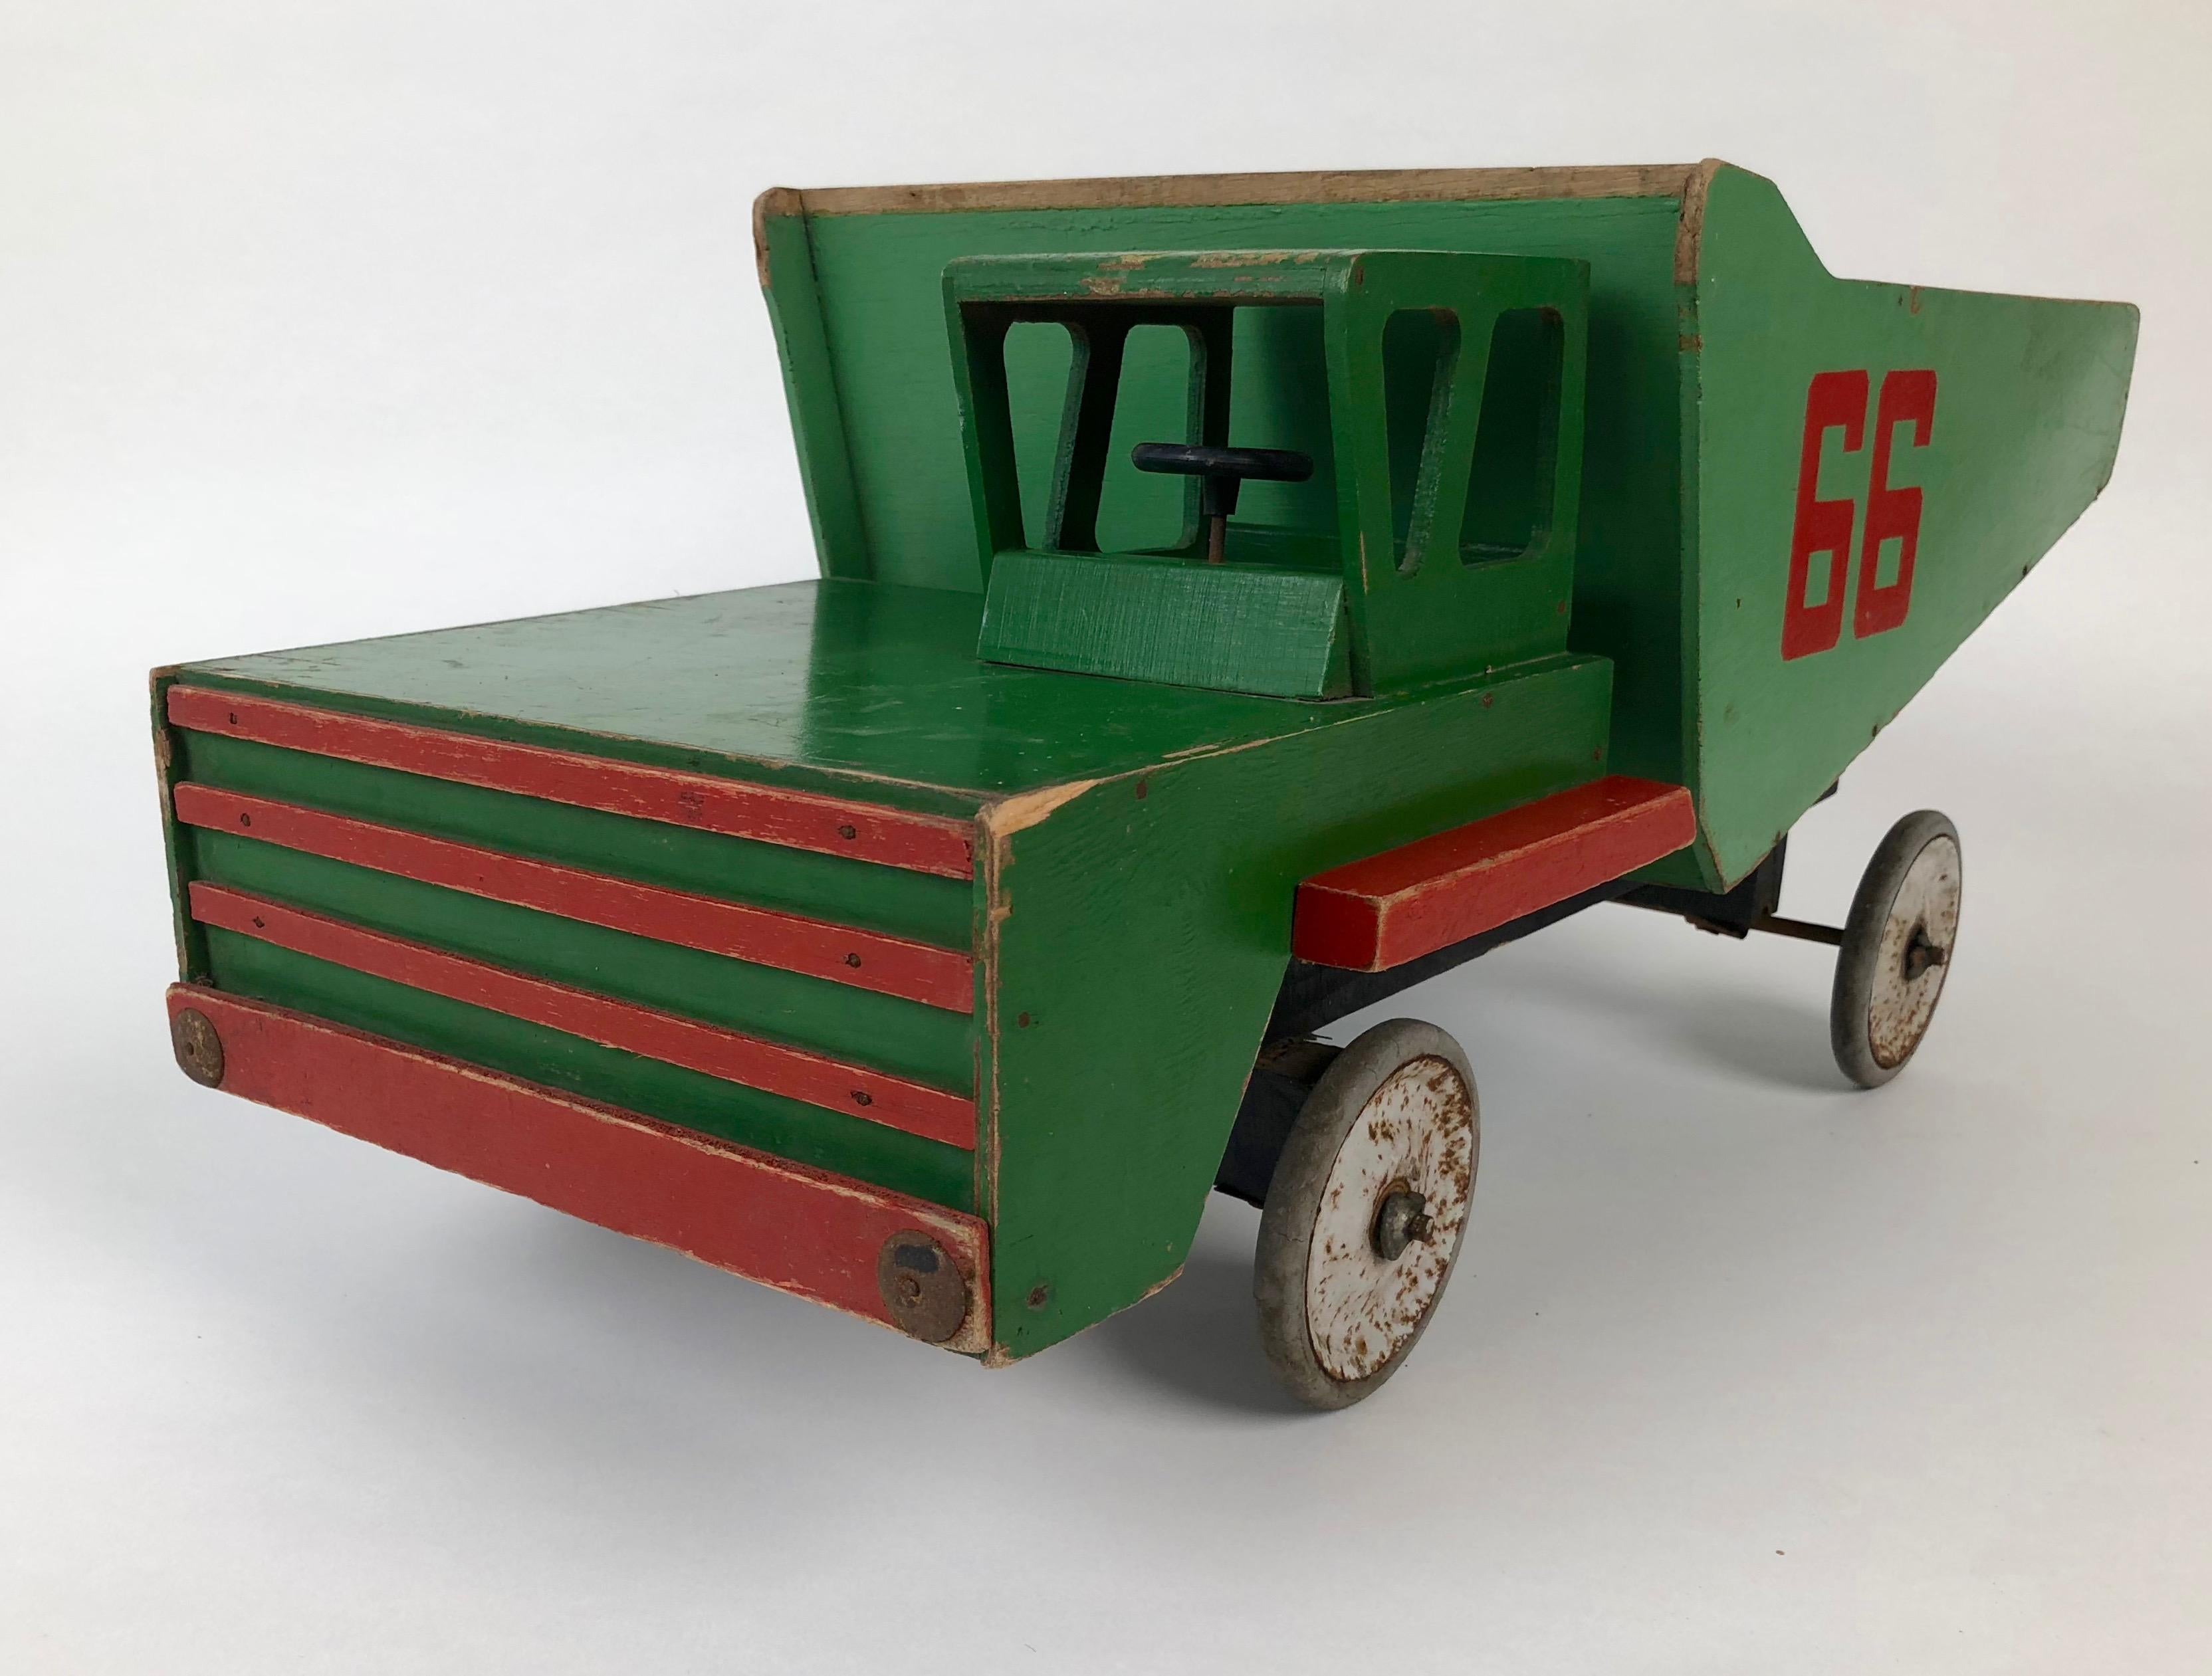 This wonderful wooden dump truck was made in USSR in the 1950s.
Lovely proportions, it´s not only a vintage toy, it´s work of art.
Condition in distress beauty.